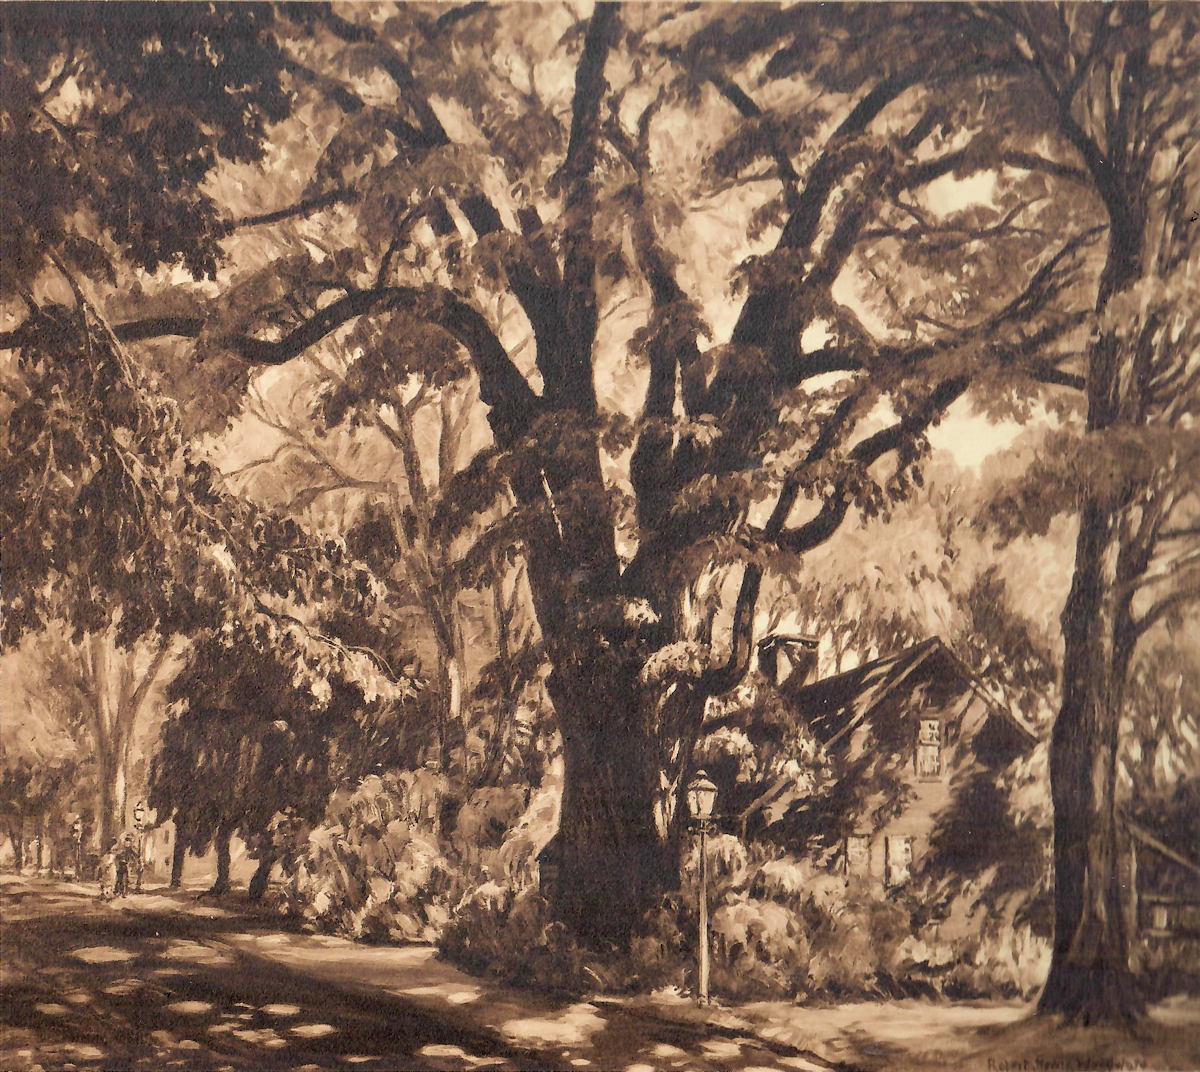 August Shade, image of sepia print